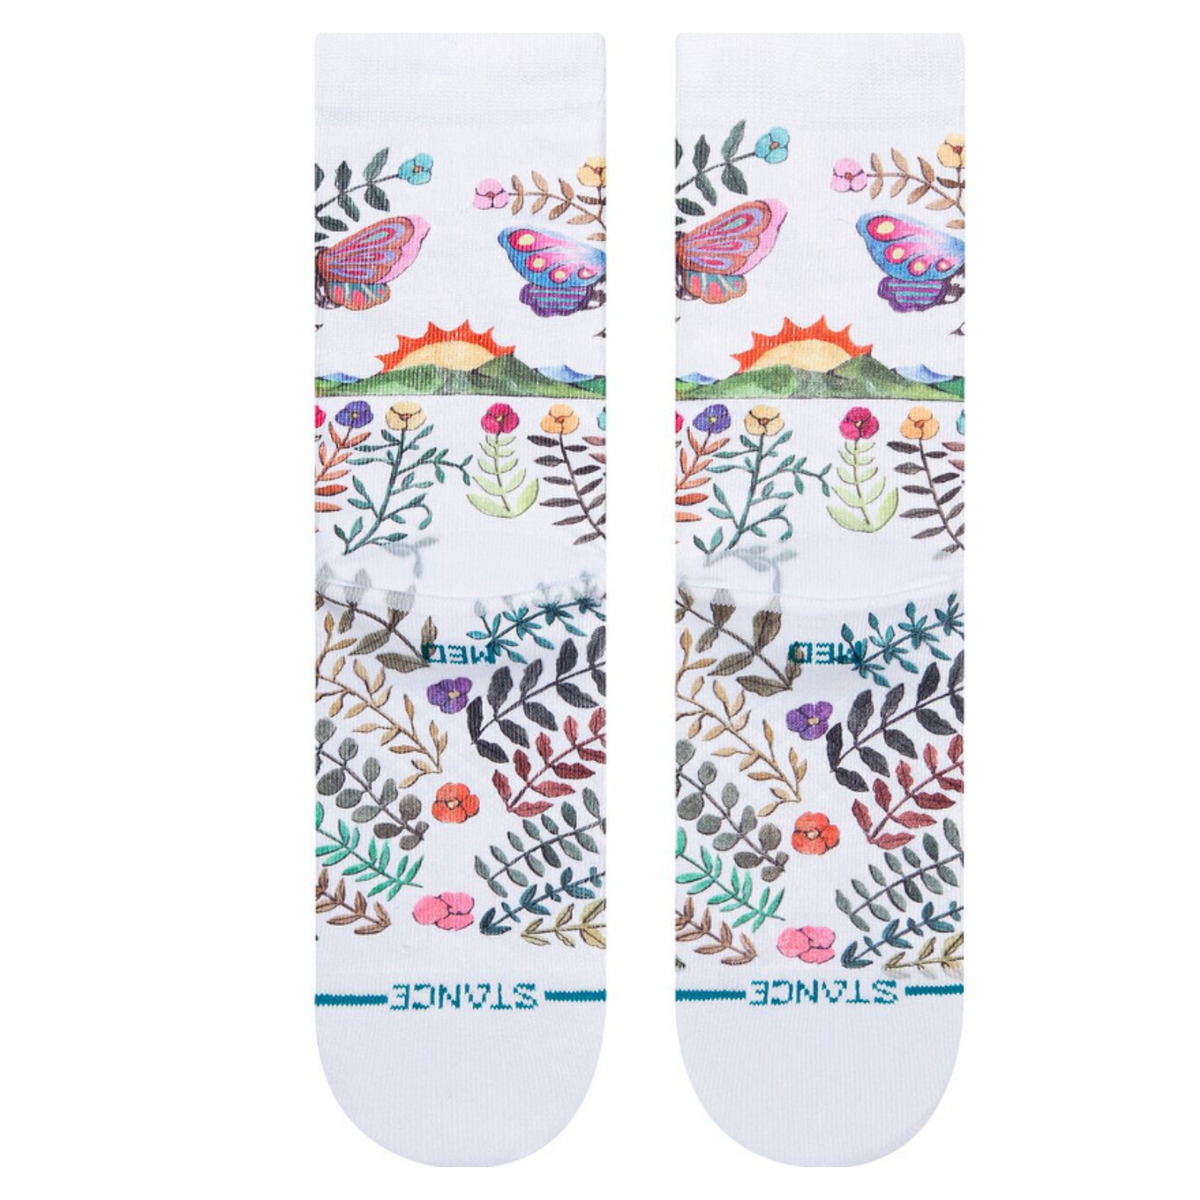 Bottom of Stance Garden of Growth women&#39;s crew sock featuring white sock with drawings of butterflies, flowers, and rainbows